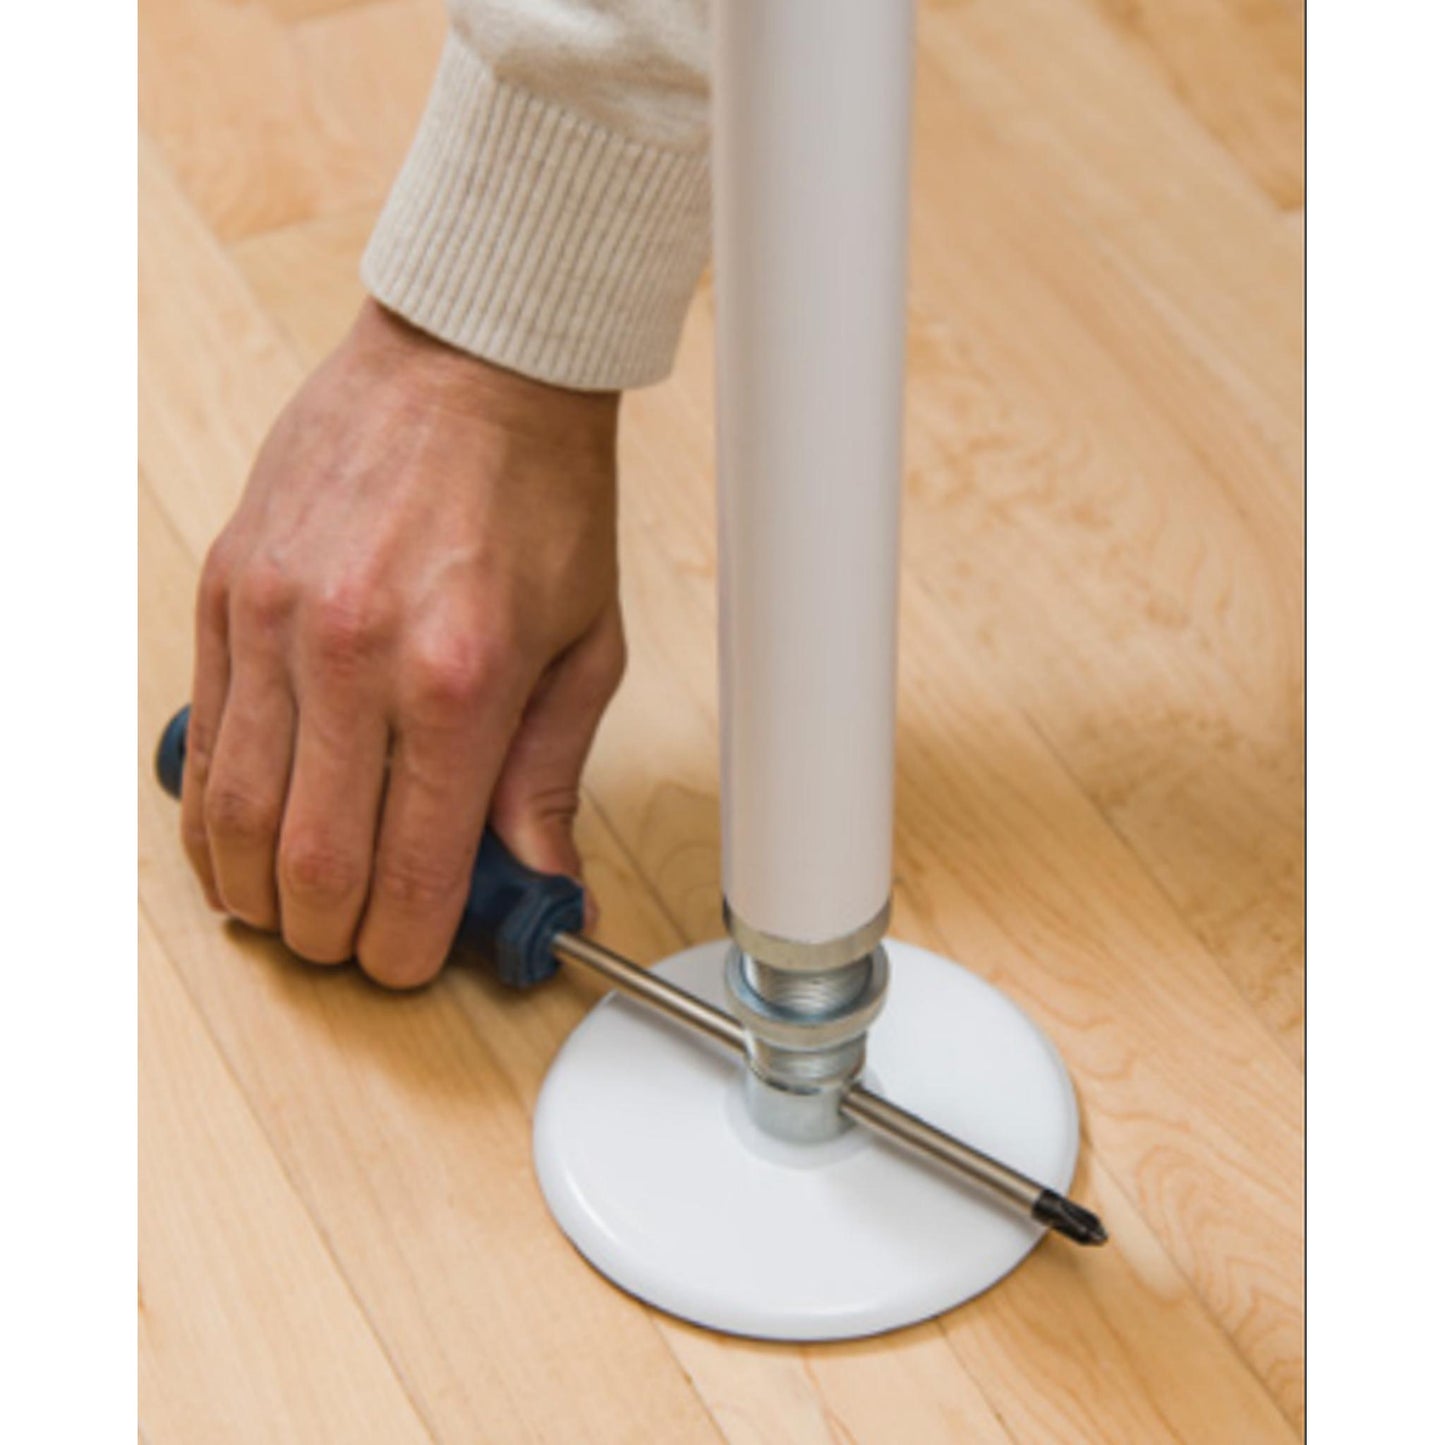 HealthCraft SuperPole White Bariatric Floor to Ceiling Safety Pole